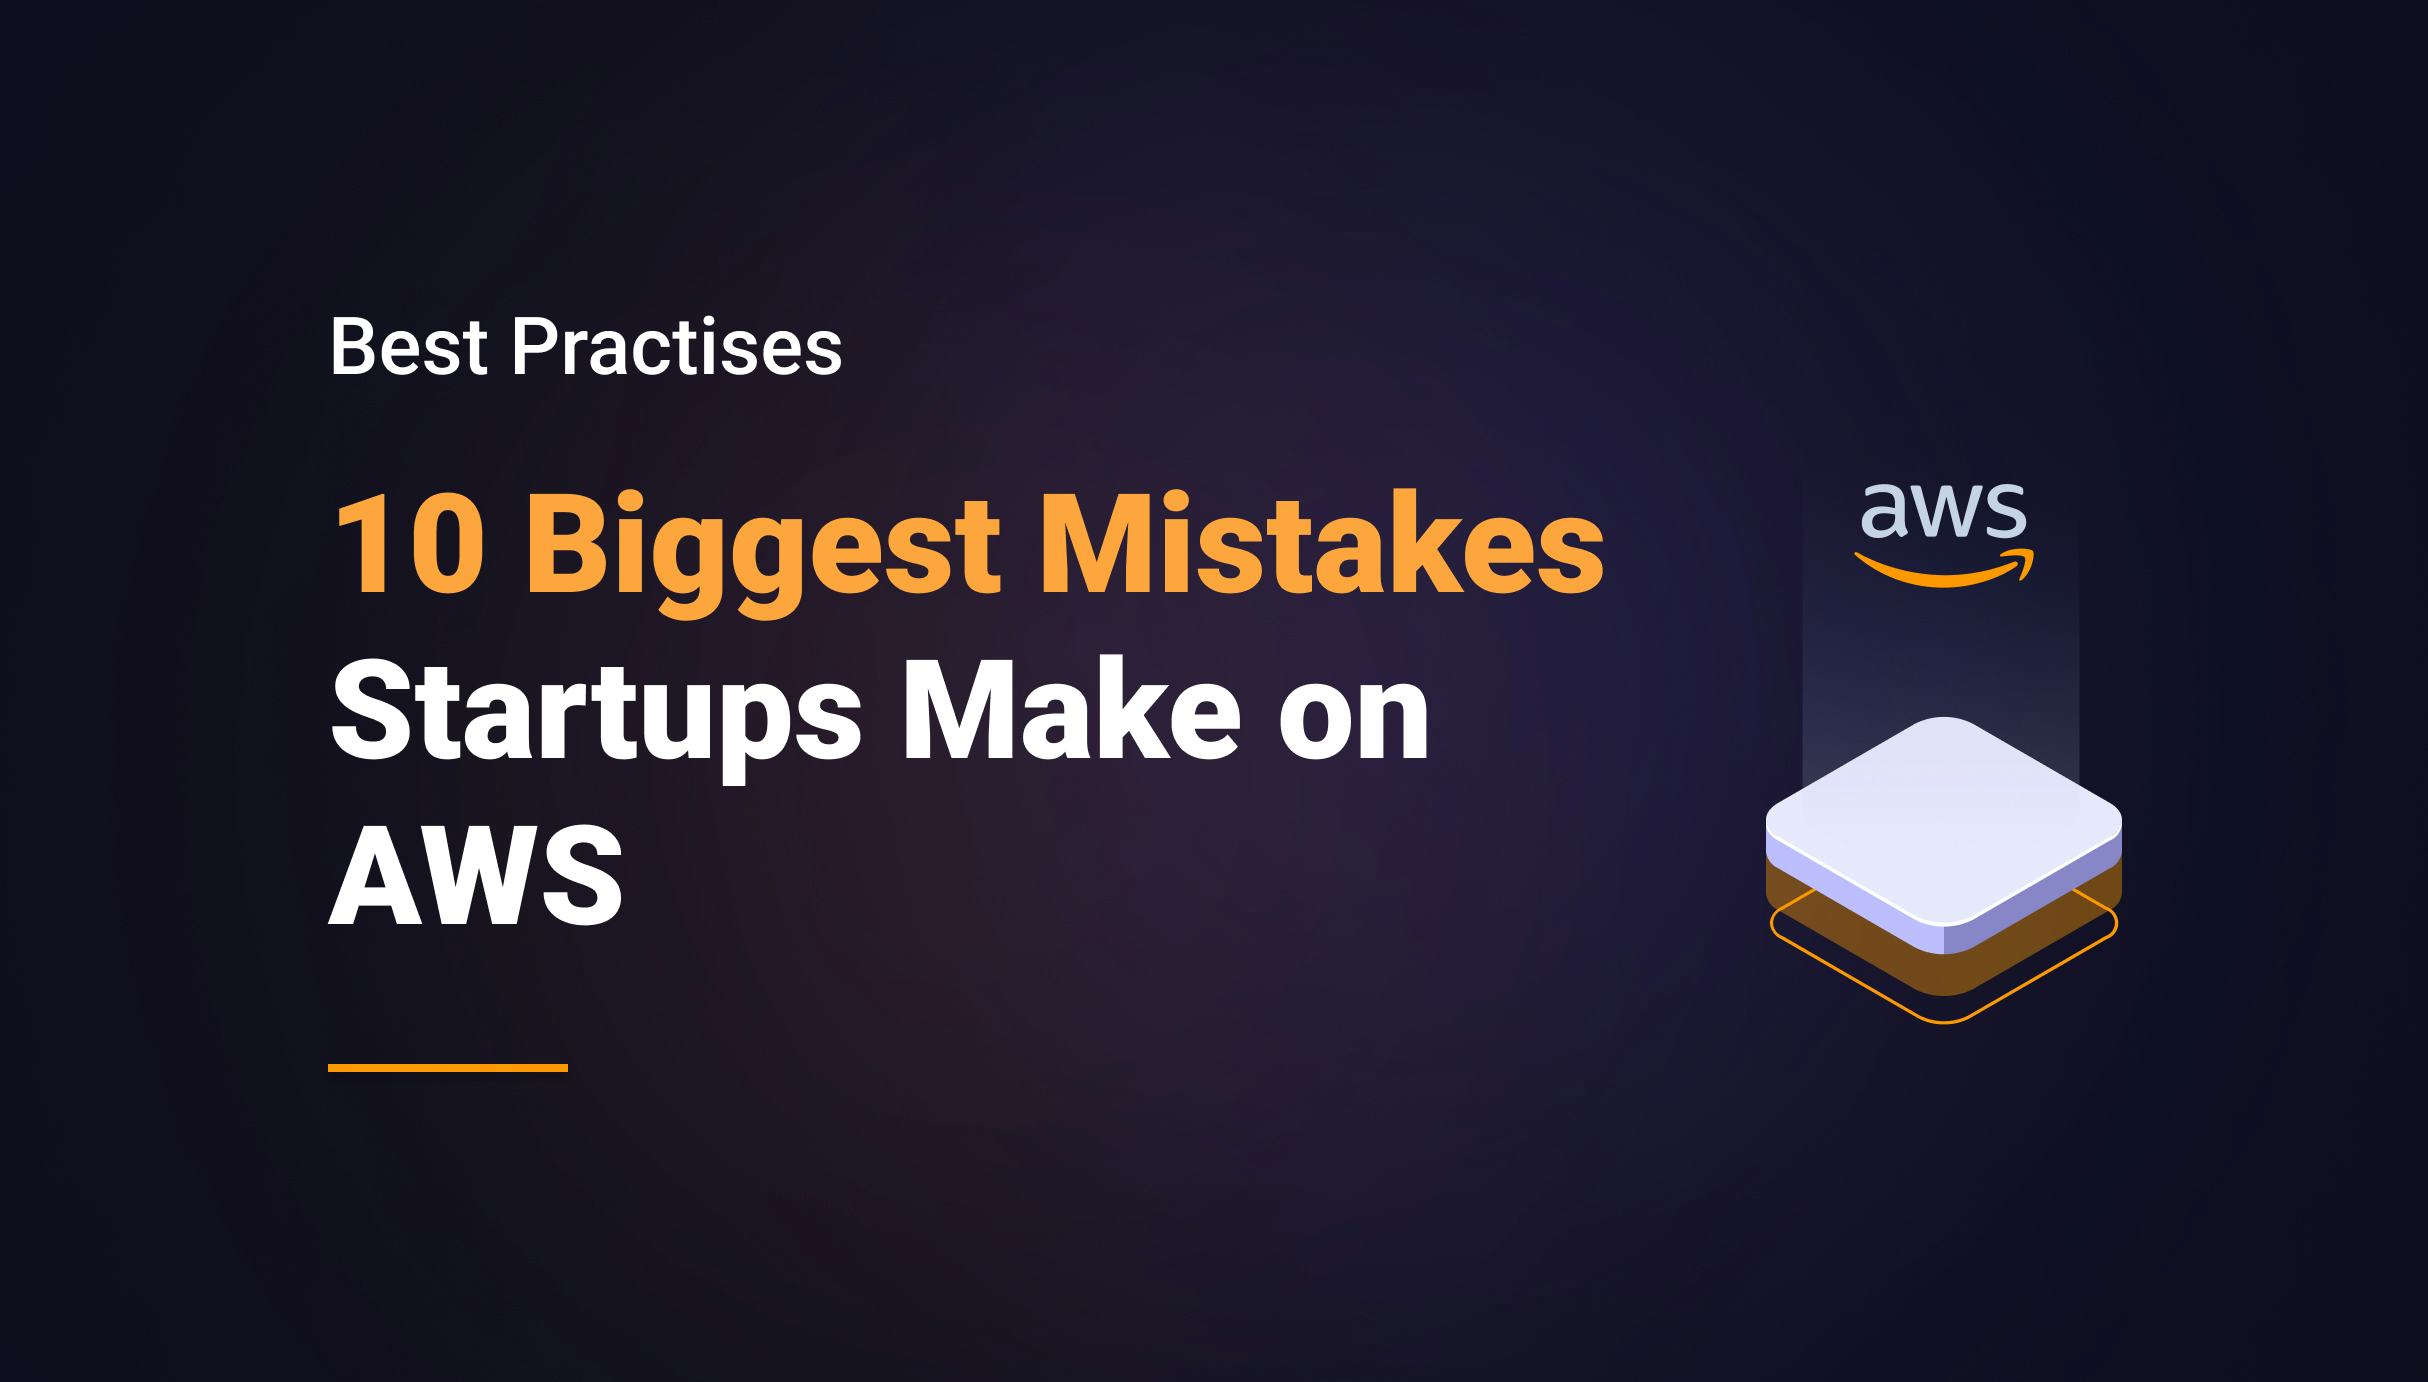 The 10 Biggest Mistakes Startups Make on AWS